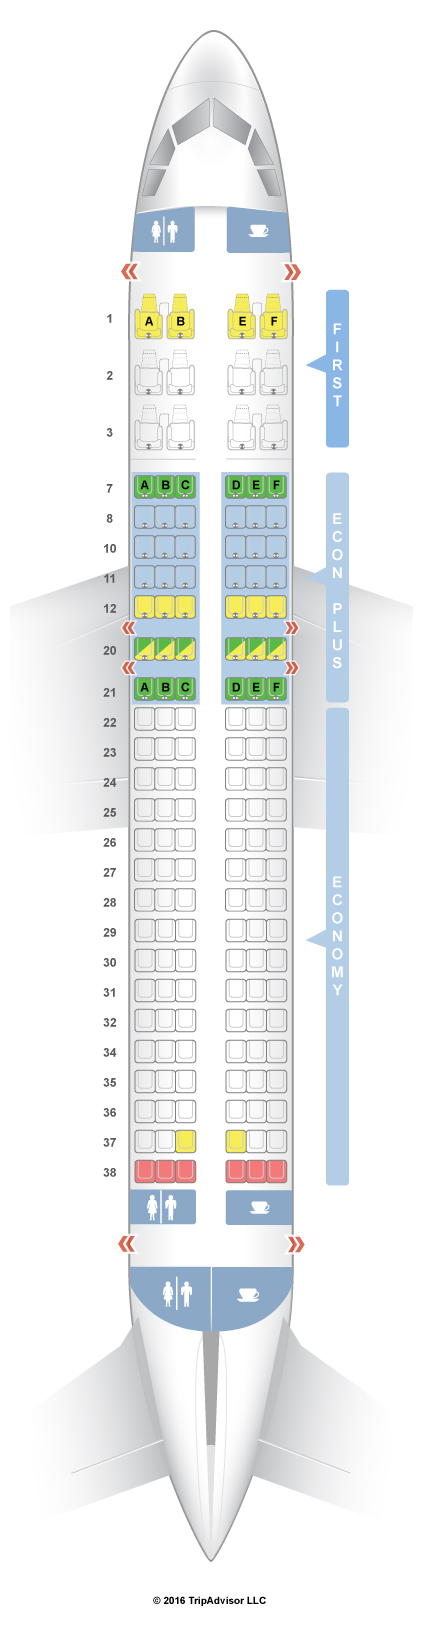 airbus a320 seats